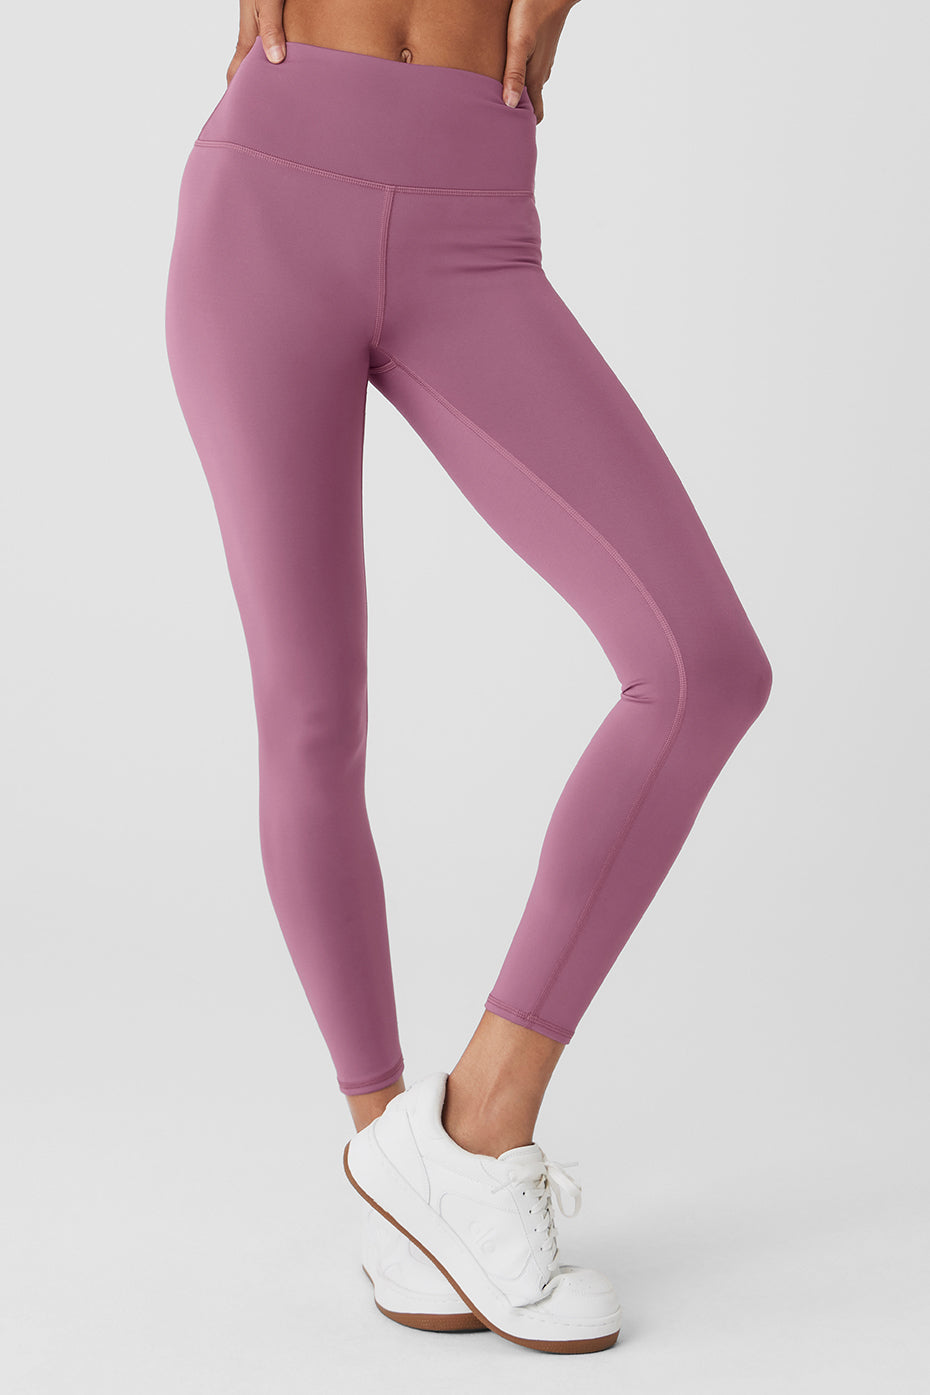 7/8 High-Waist Airlift Legging - Soft Mulberry - Soft Mulberry / M